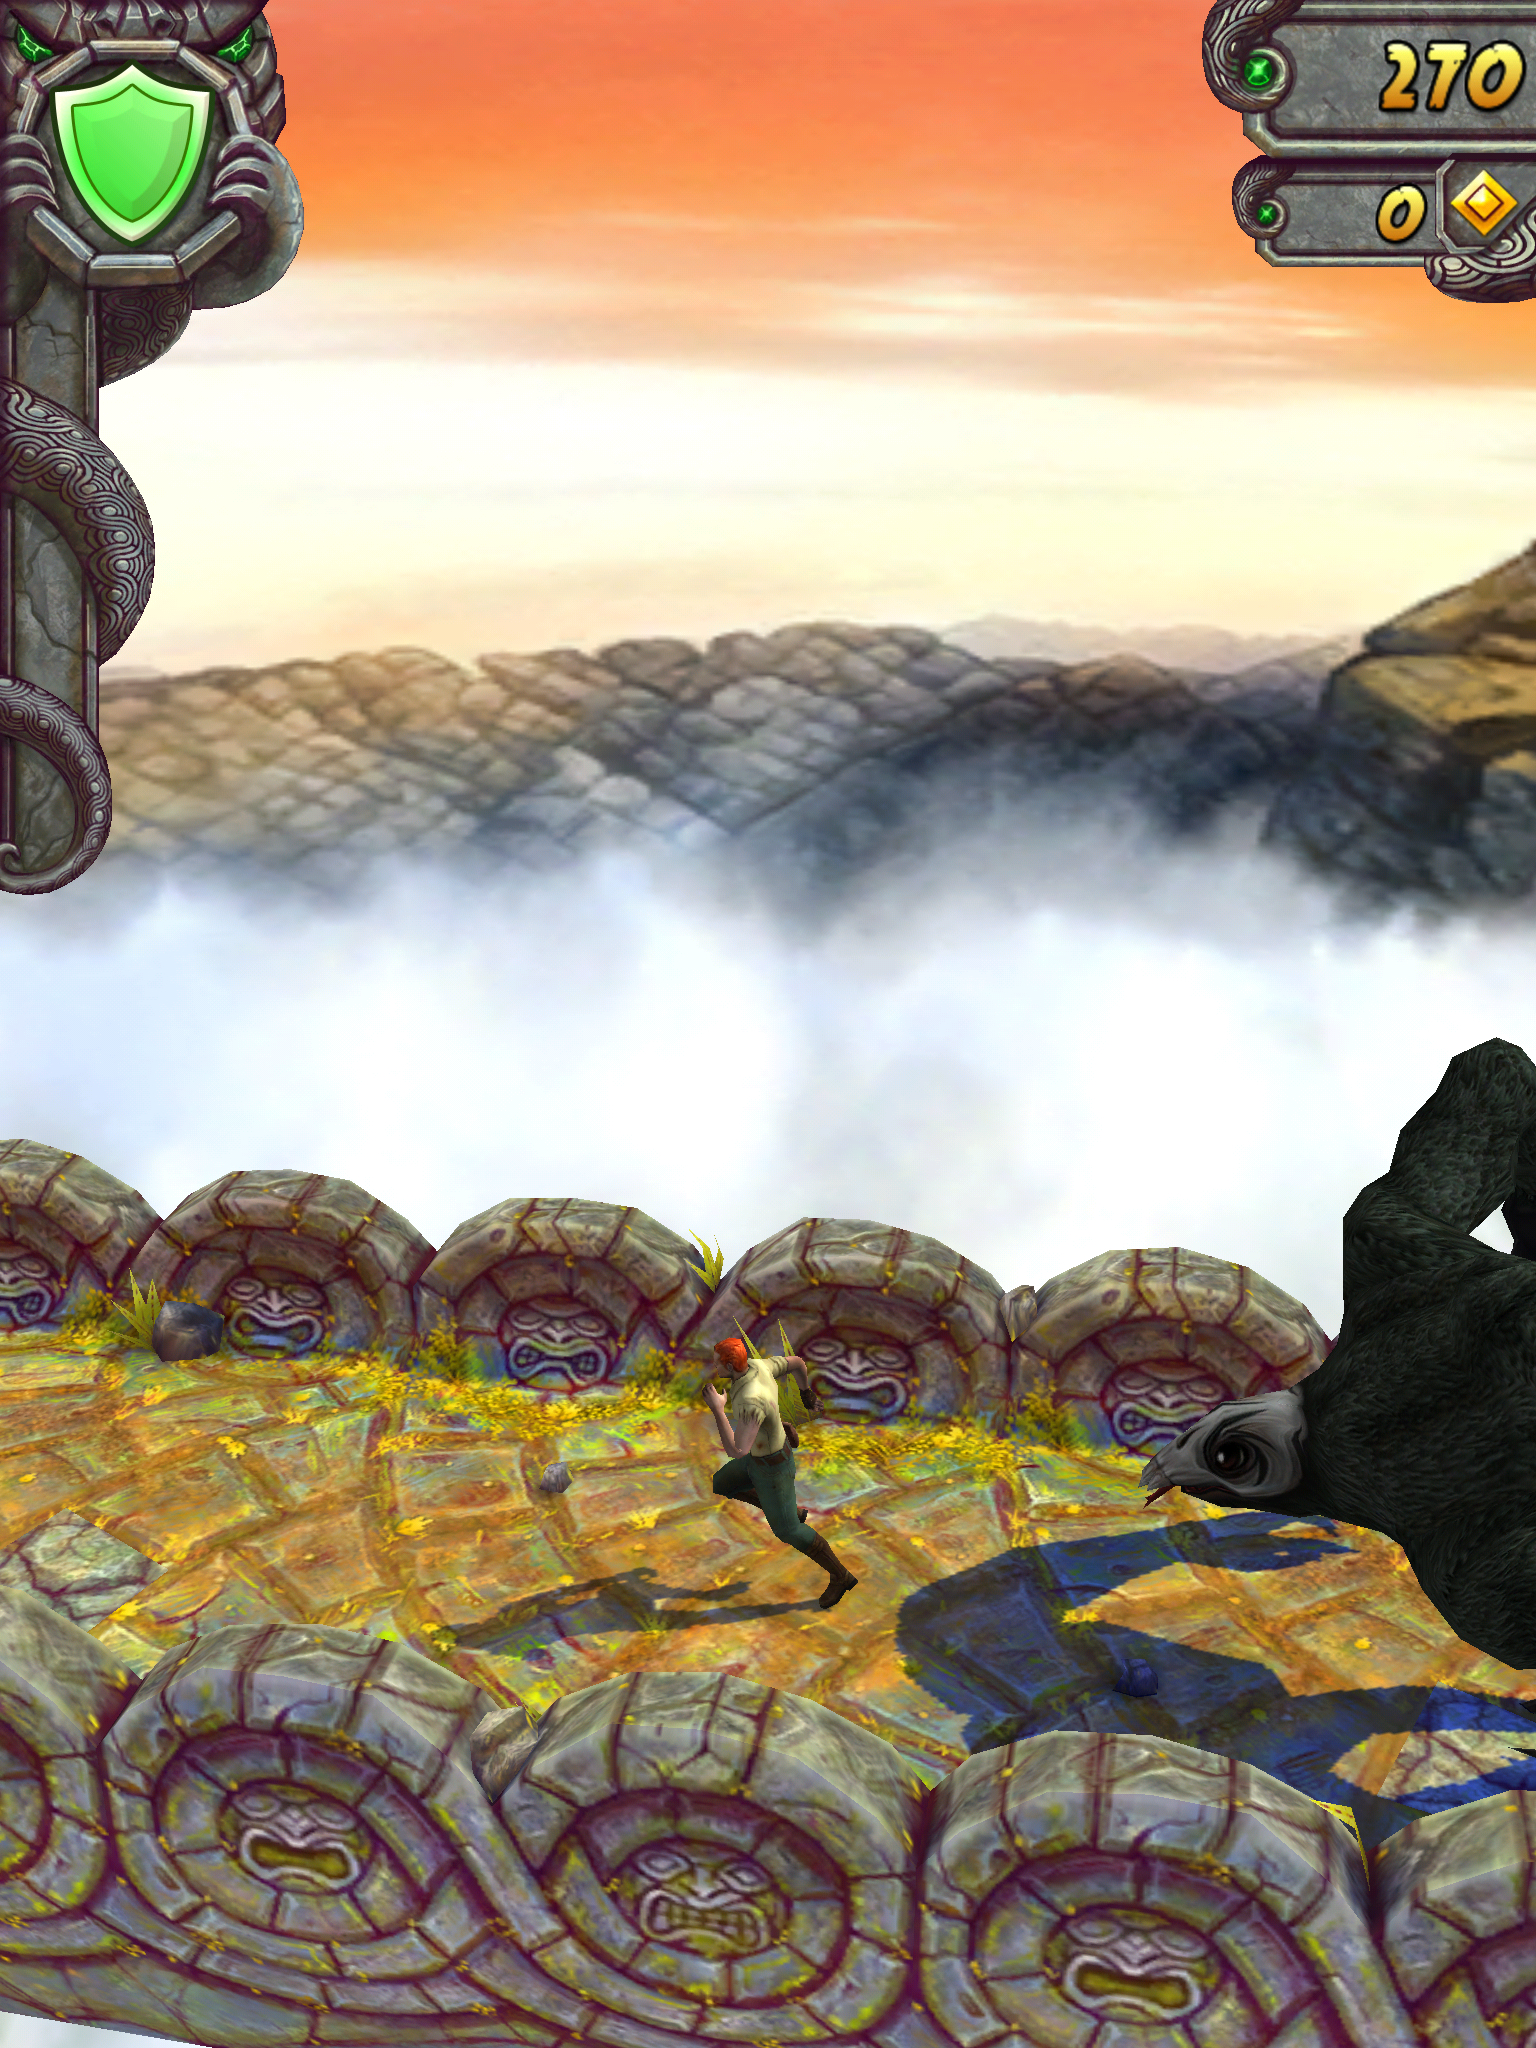 Sponsored Game Review: Temple Run 2